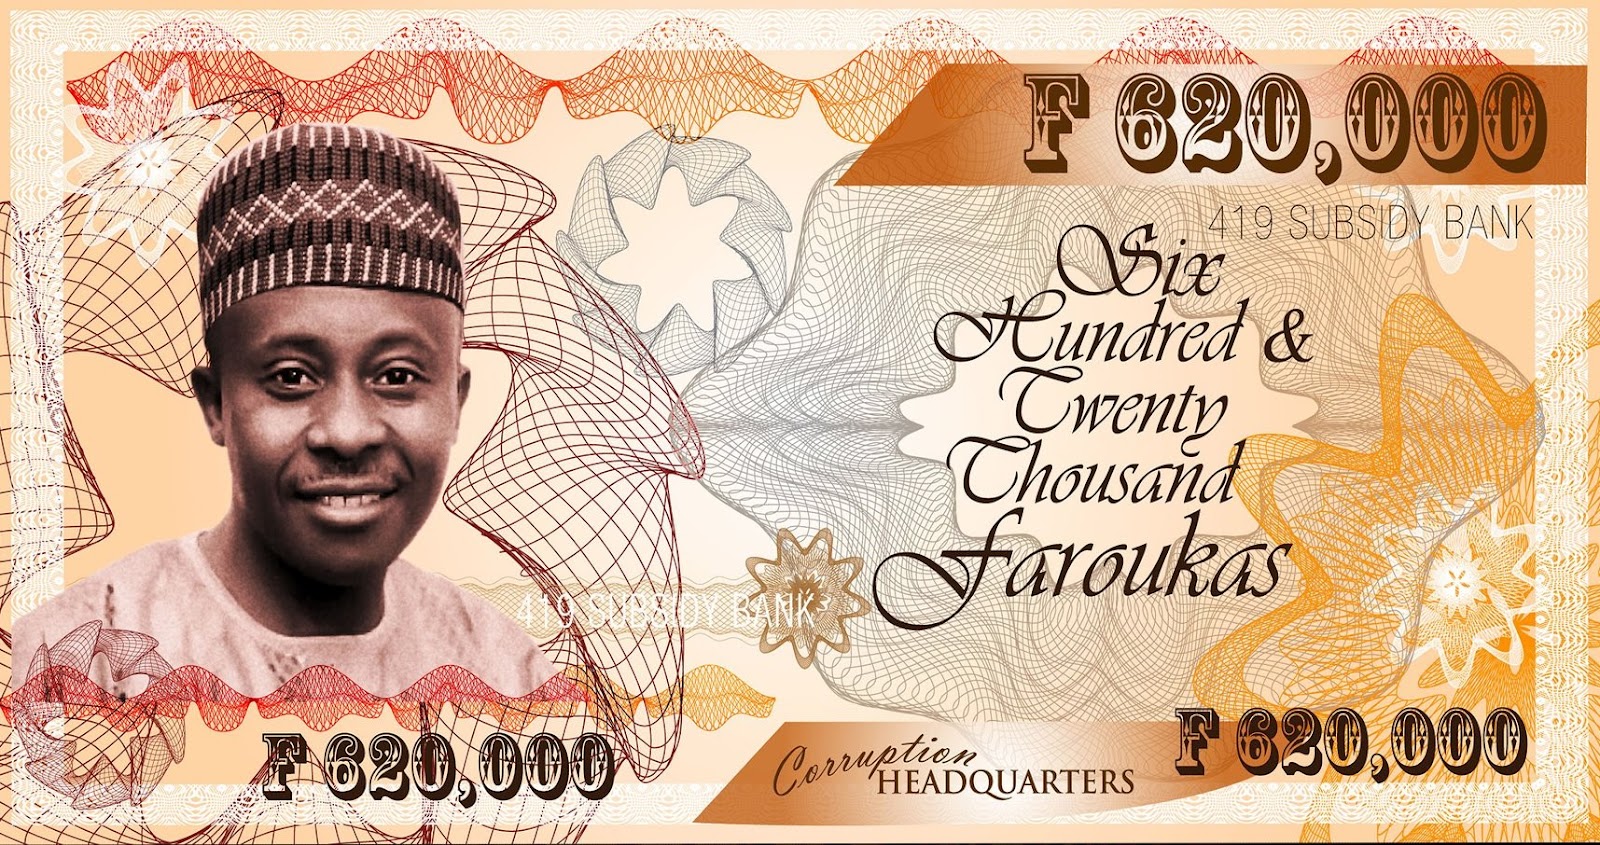 Currency me. Nigeria's currency Note.